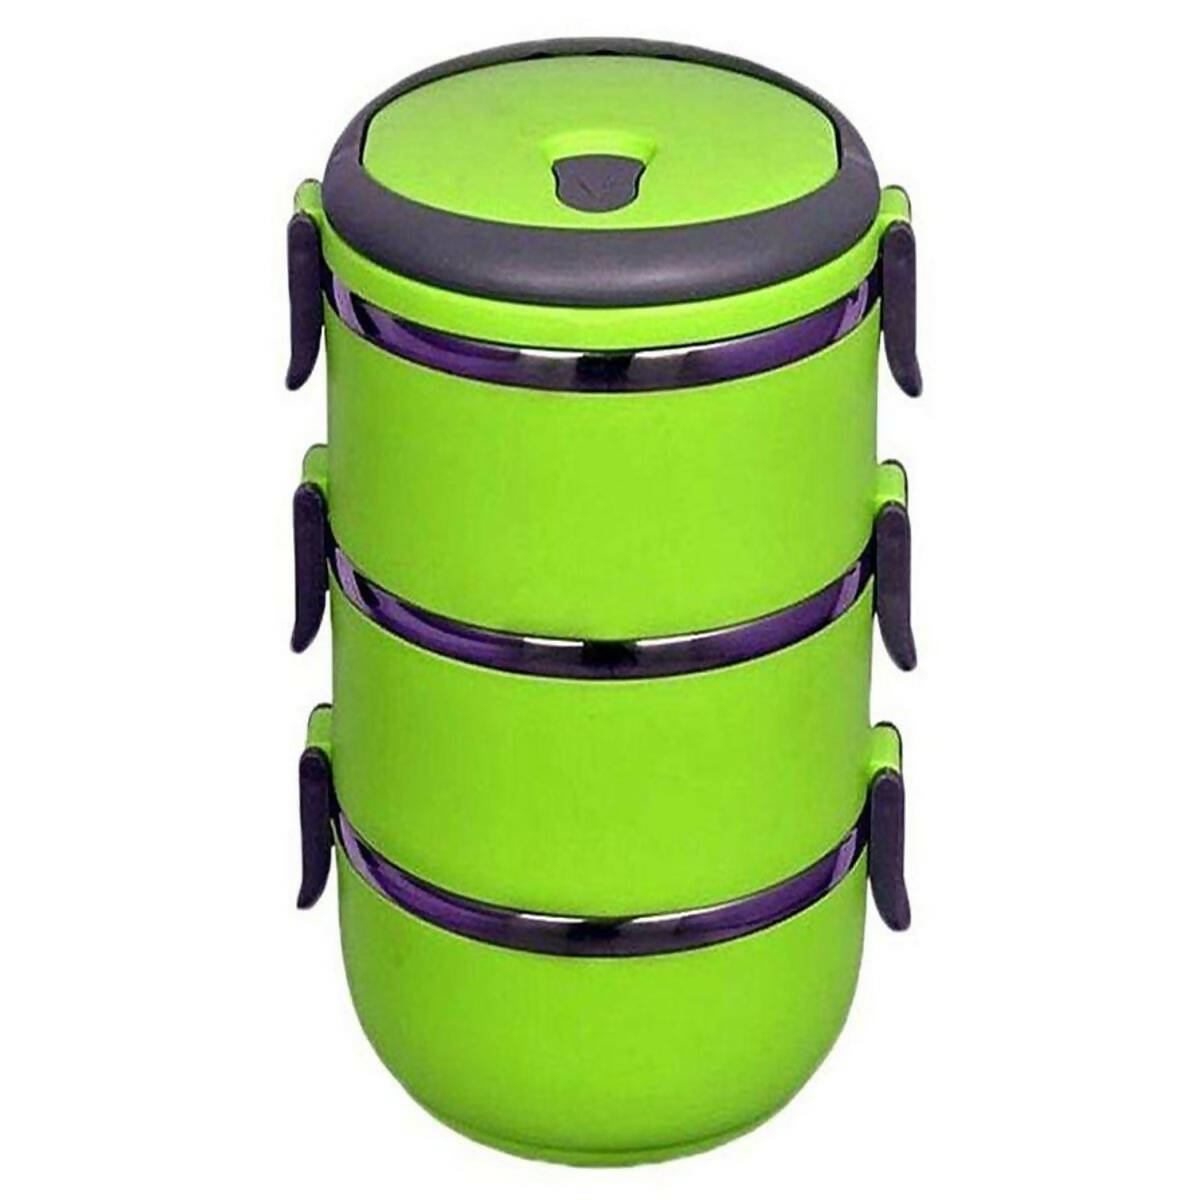 3 Pieces Plastic Body With Stainless Steel Lunch Box 2.1 Litter